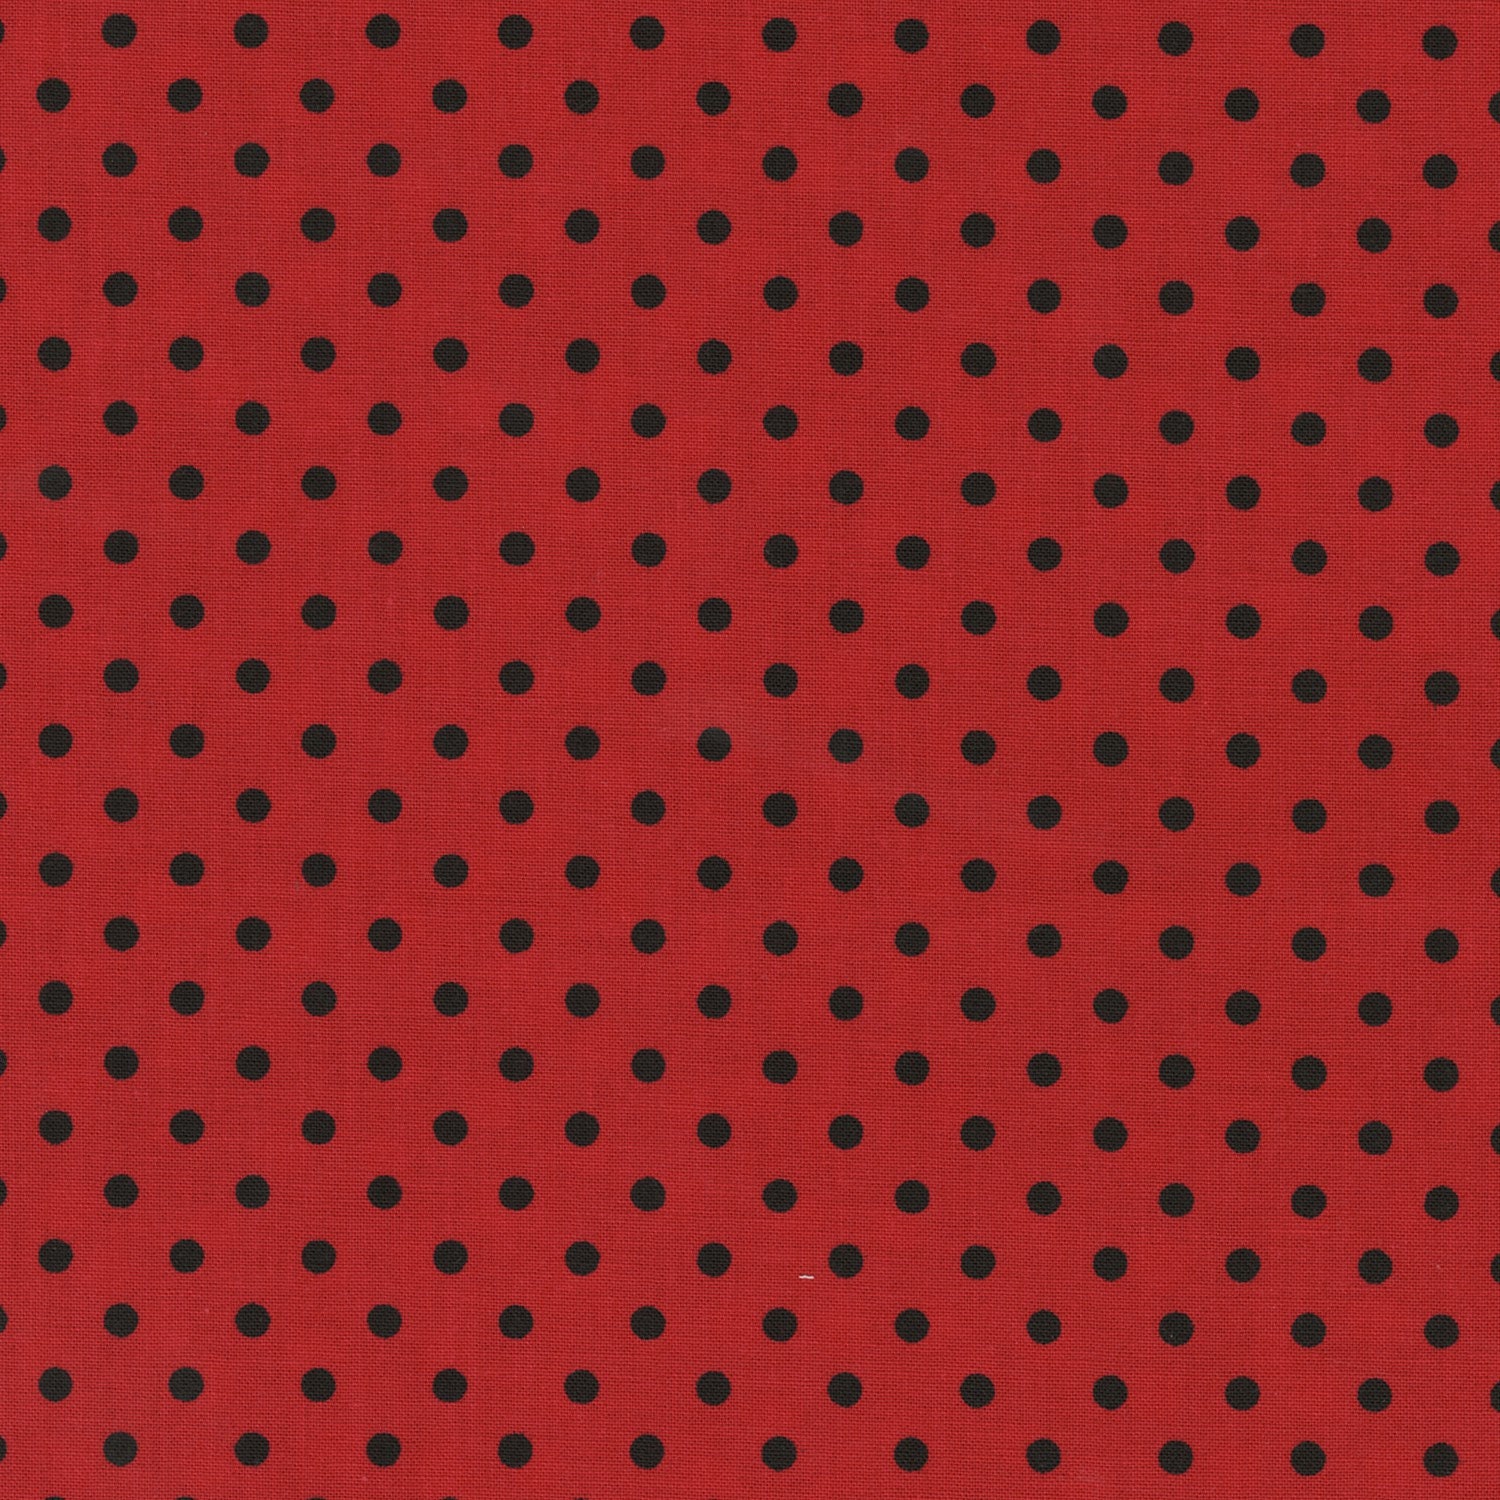 1 Yd. Waverly Big Dot Quilt Fabric Red and White Nickel Polka Dots